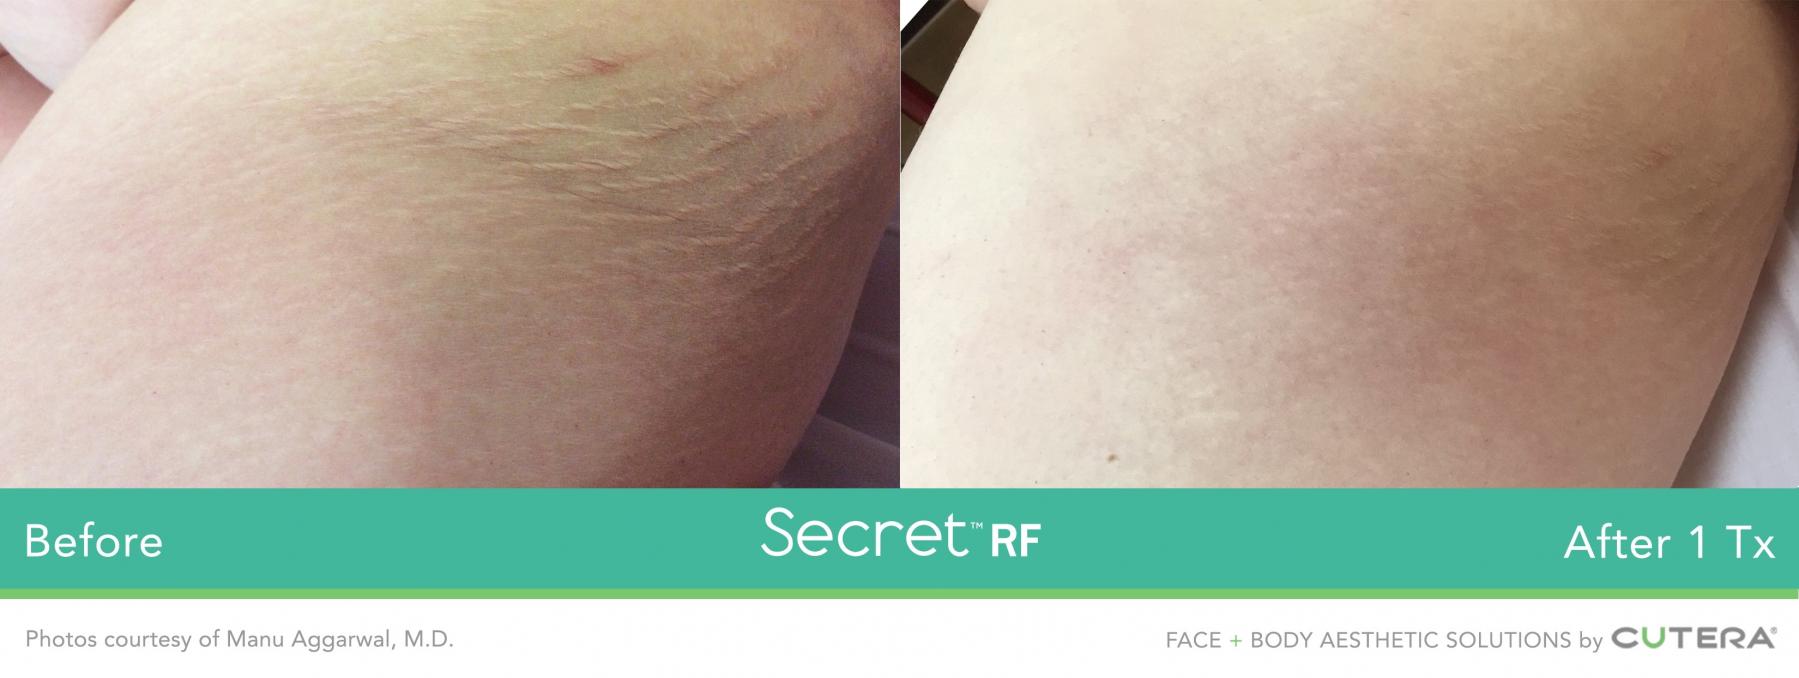 Secret RF: Patient 9 - Before and After 1